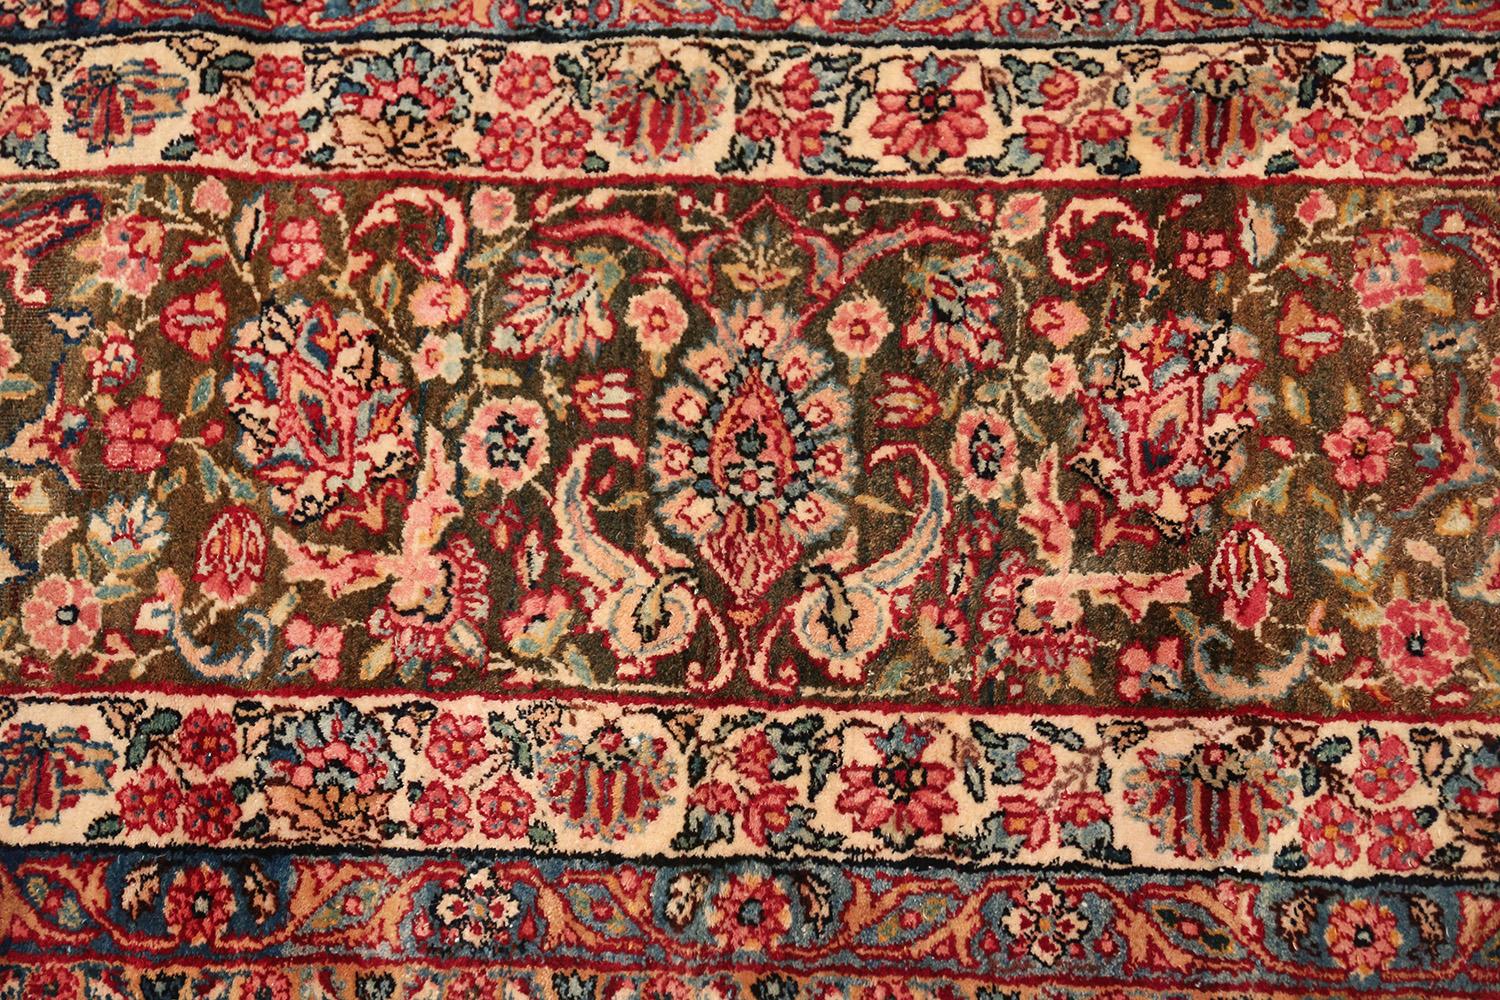 Antique Kerman Persian Rug. Size: 9 ft 9 in x 17 ft 3 in (2.97 m x 5.26 m) 5